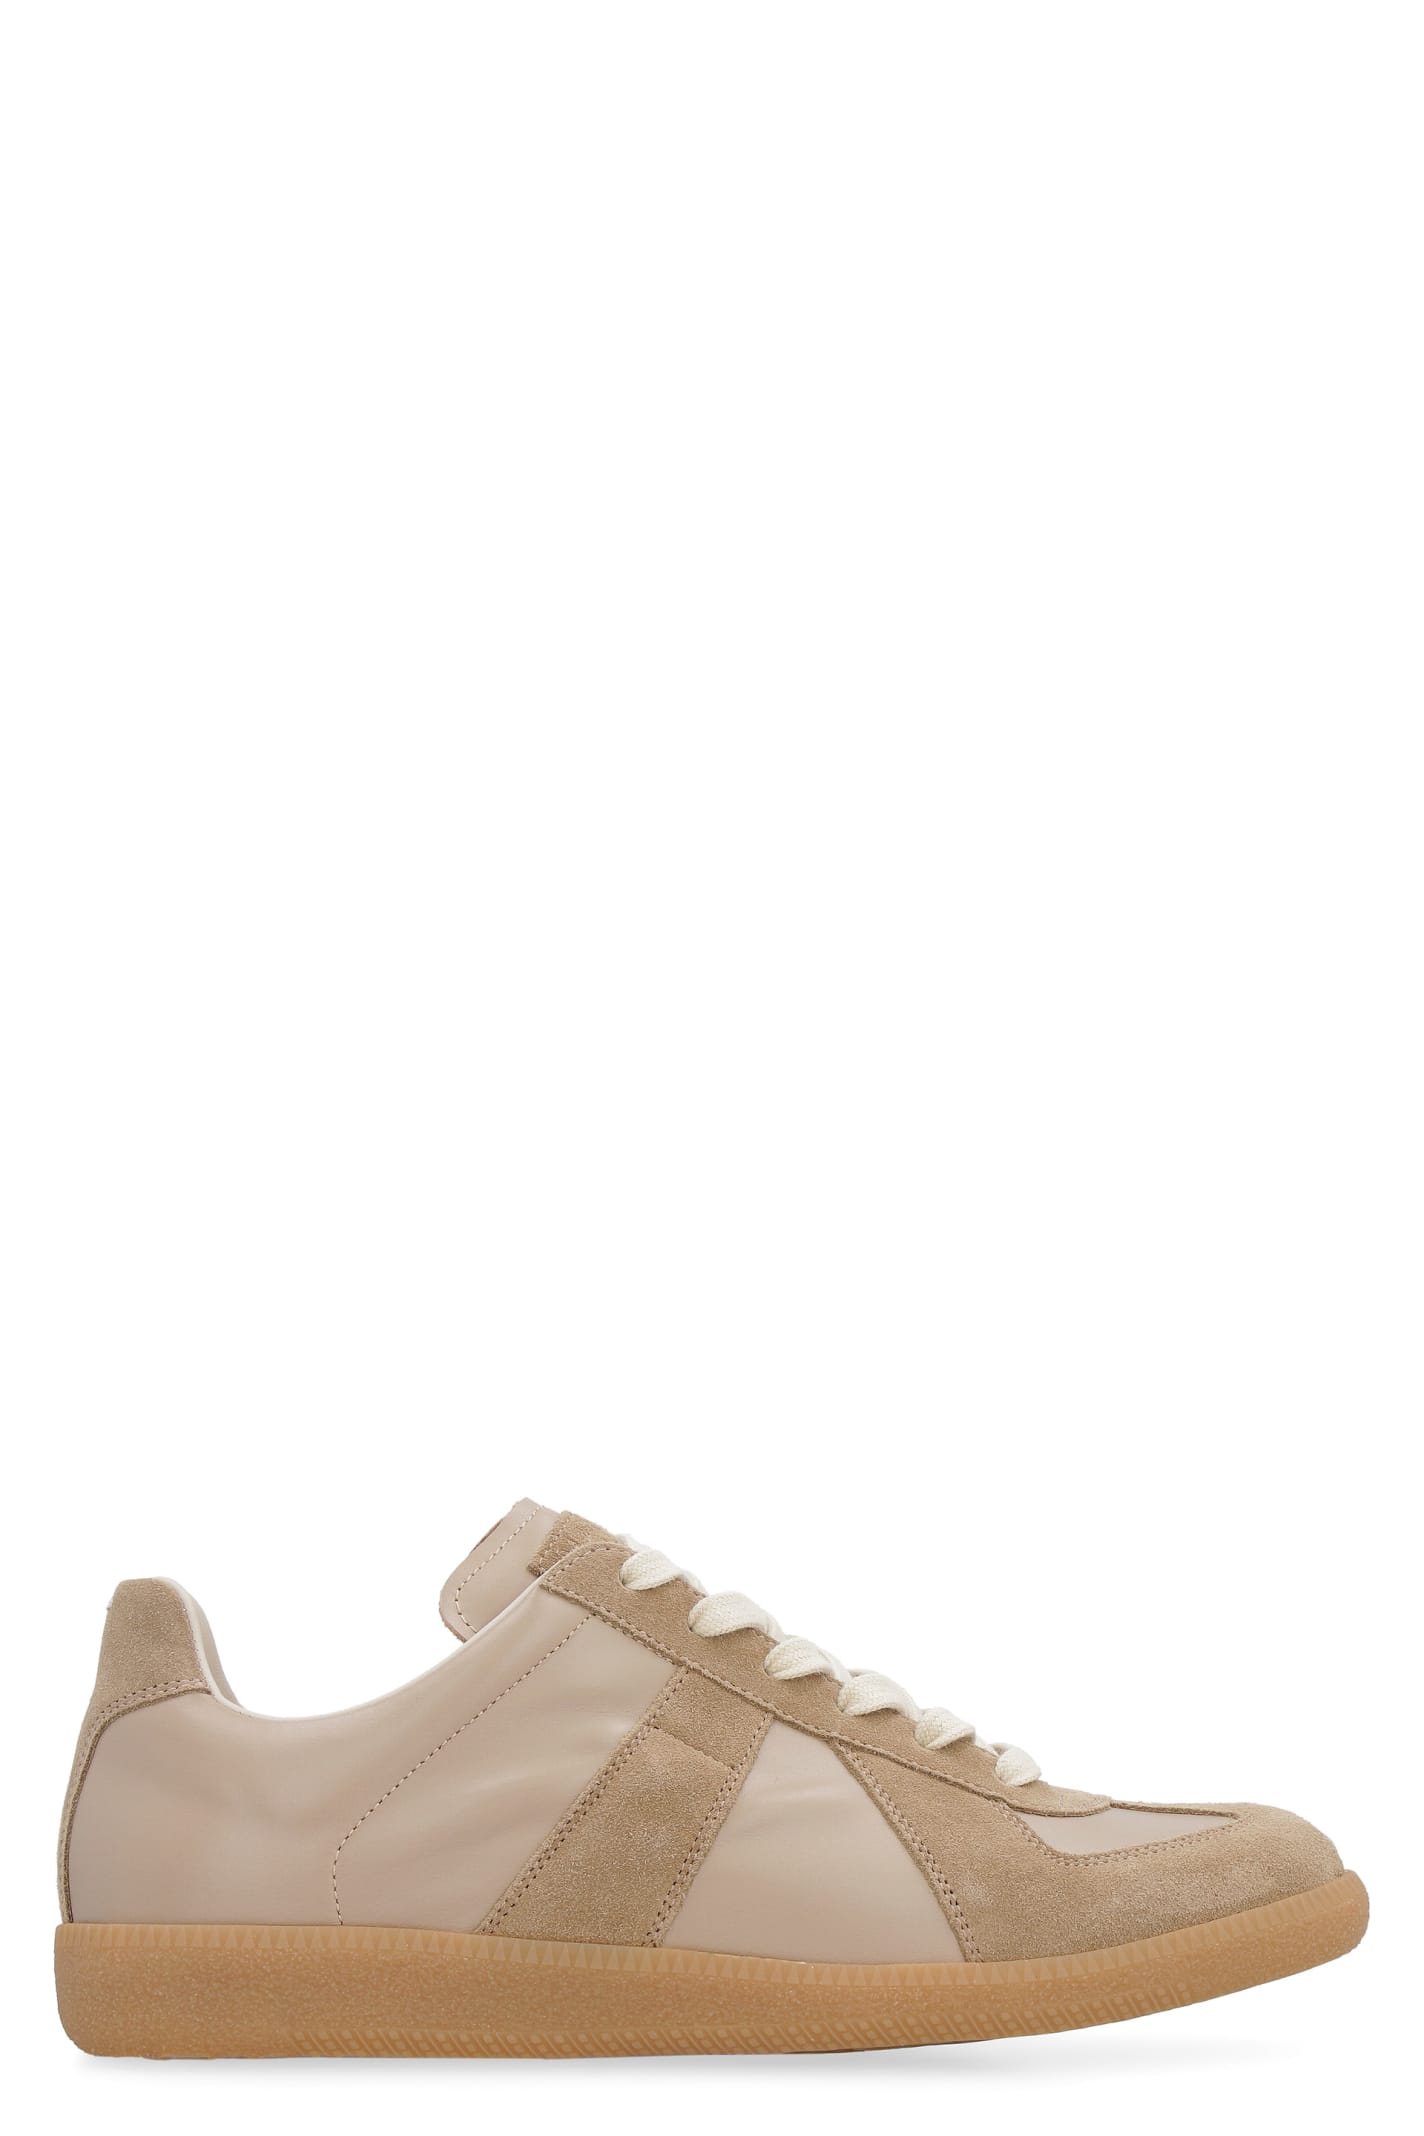 MAISON MARGIELA REPLICA LEATHER LOW-TOP SNEAKERS,S57WS0236P1895 T2076